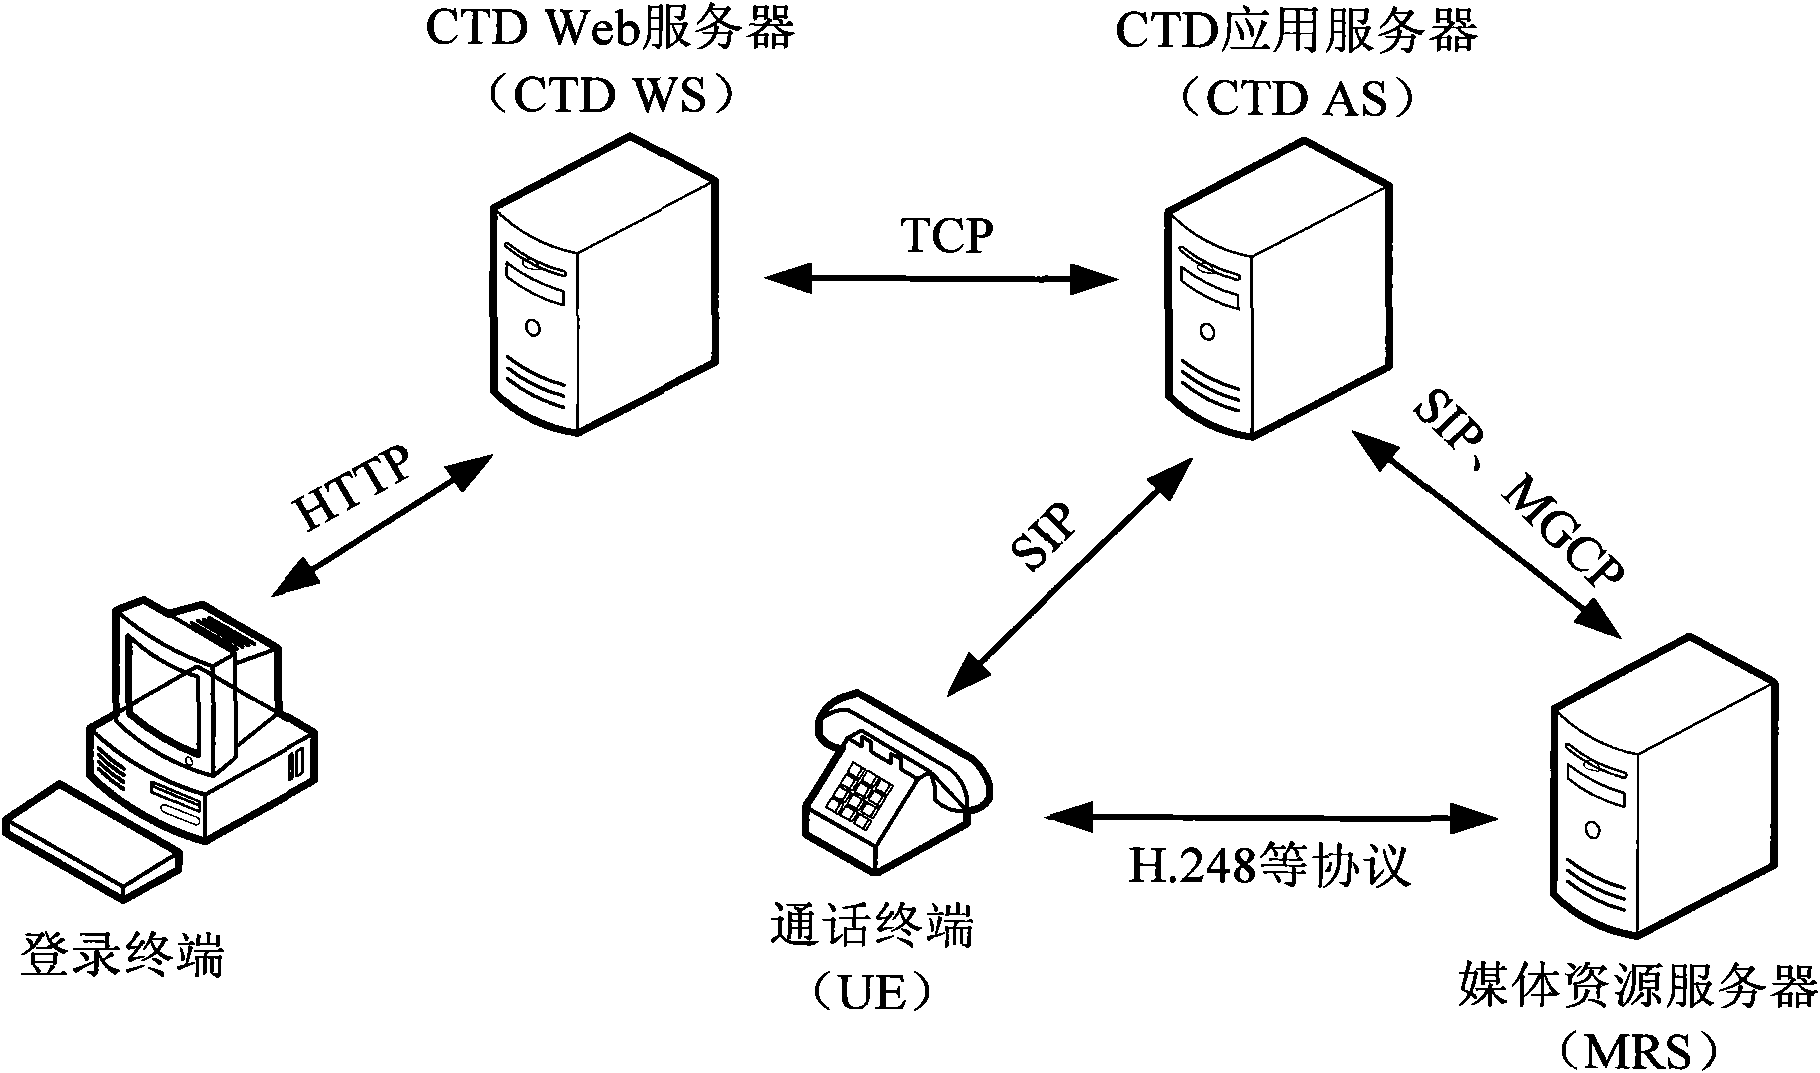 Method and system for realizing call transfer in click-to-dial (CTD) service